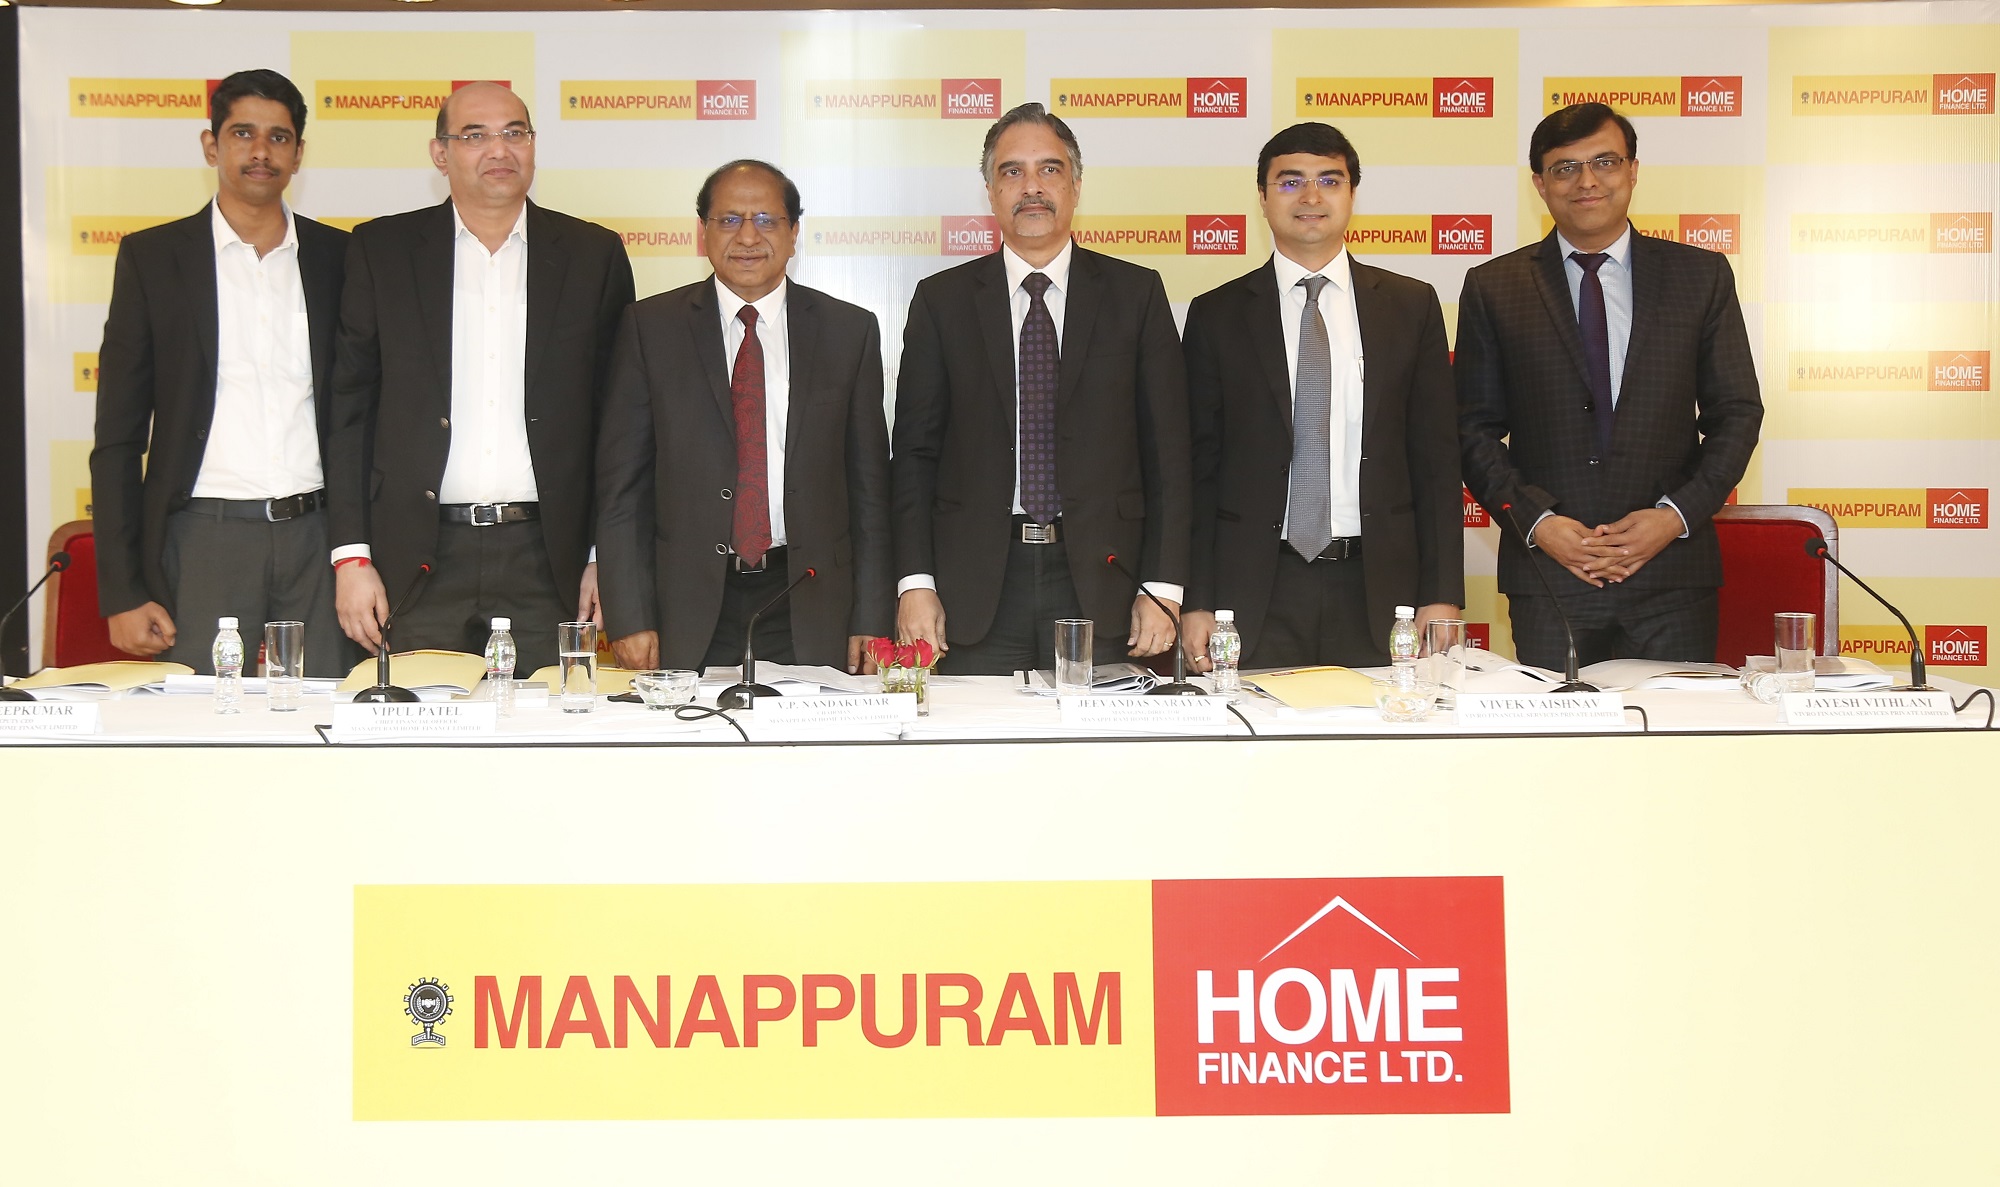 (From L to R): Mr. Sandeepkumar (Deputy CEO, Manappuram Home Finance Limited), Mr. Vipul Patel (Chief Financial Officer, Manappuram Home Finance Limited), Mr. V.P. Nandakumar (Chairman, Manappuram Home Finance Limited) , Mr. Jeevandas Narayan (Managing Director, Manappuram Home Finance Limited), Mr. Vivek Vaishnav ( Vivro Financial Service Limited) and Mr. Jayesh Vithlani ( Vivro Financial Service Limited) at the announcement of company’s NCD issue - Photo By Sachin Murdeshwar GPN